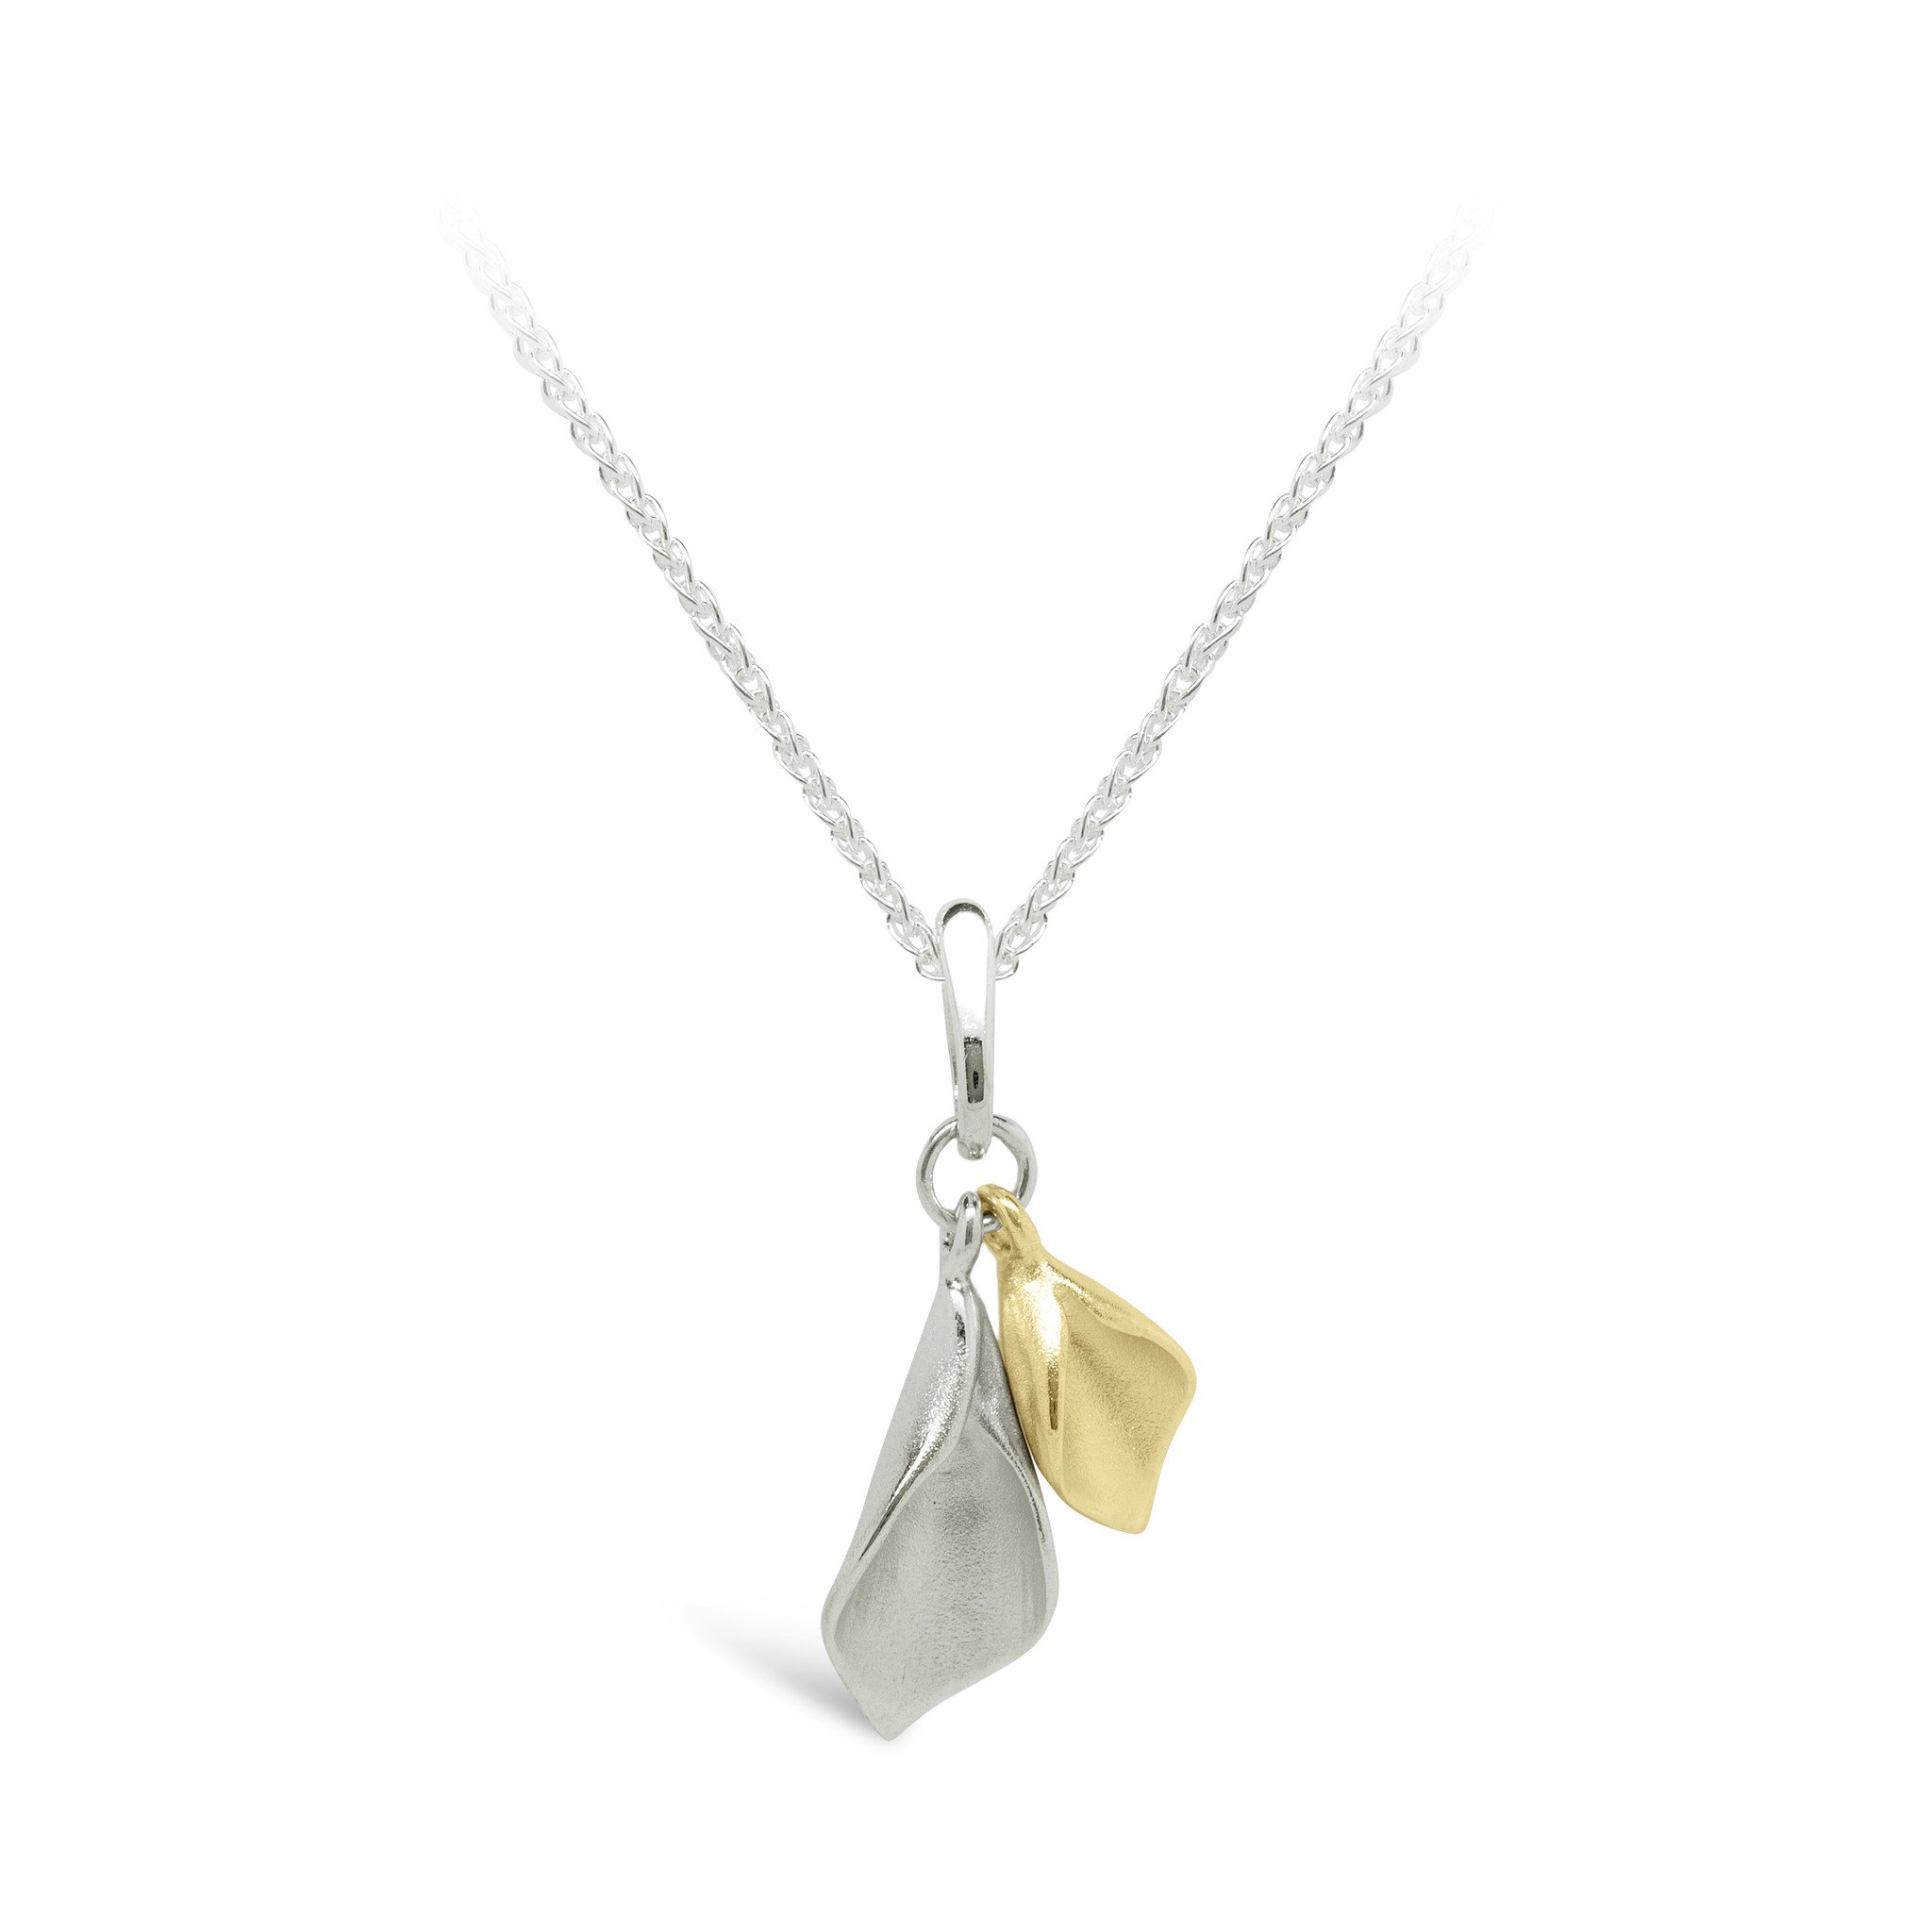 WDSP_Lilium_Tiny_Double_Calla_Lily_Pendant_Silver_and_Yellow_Gold